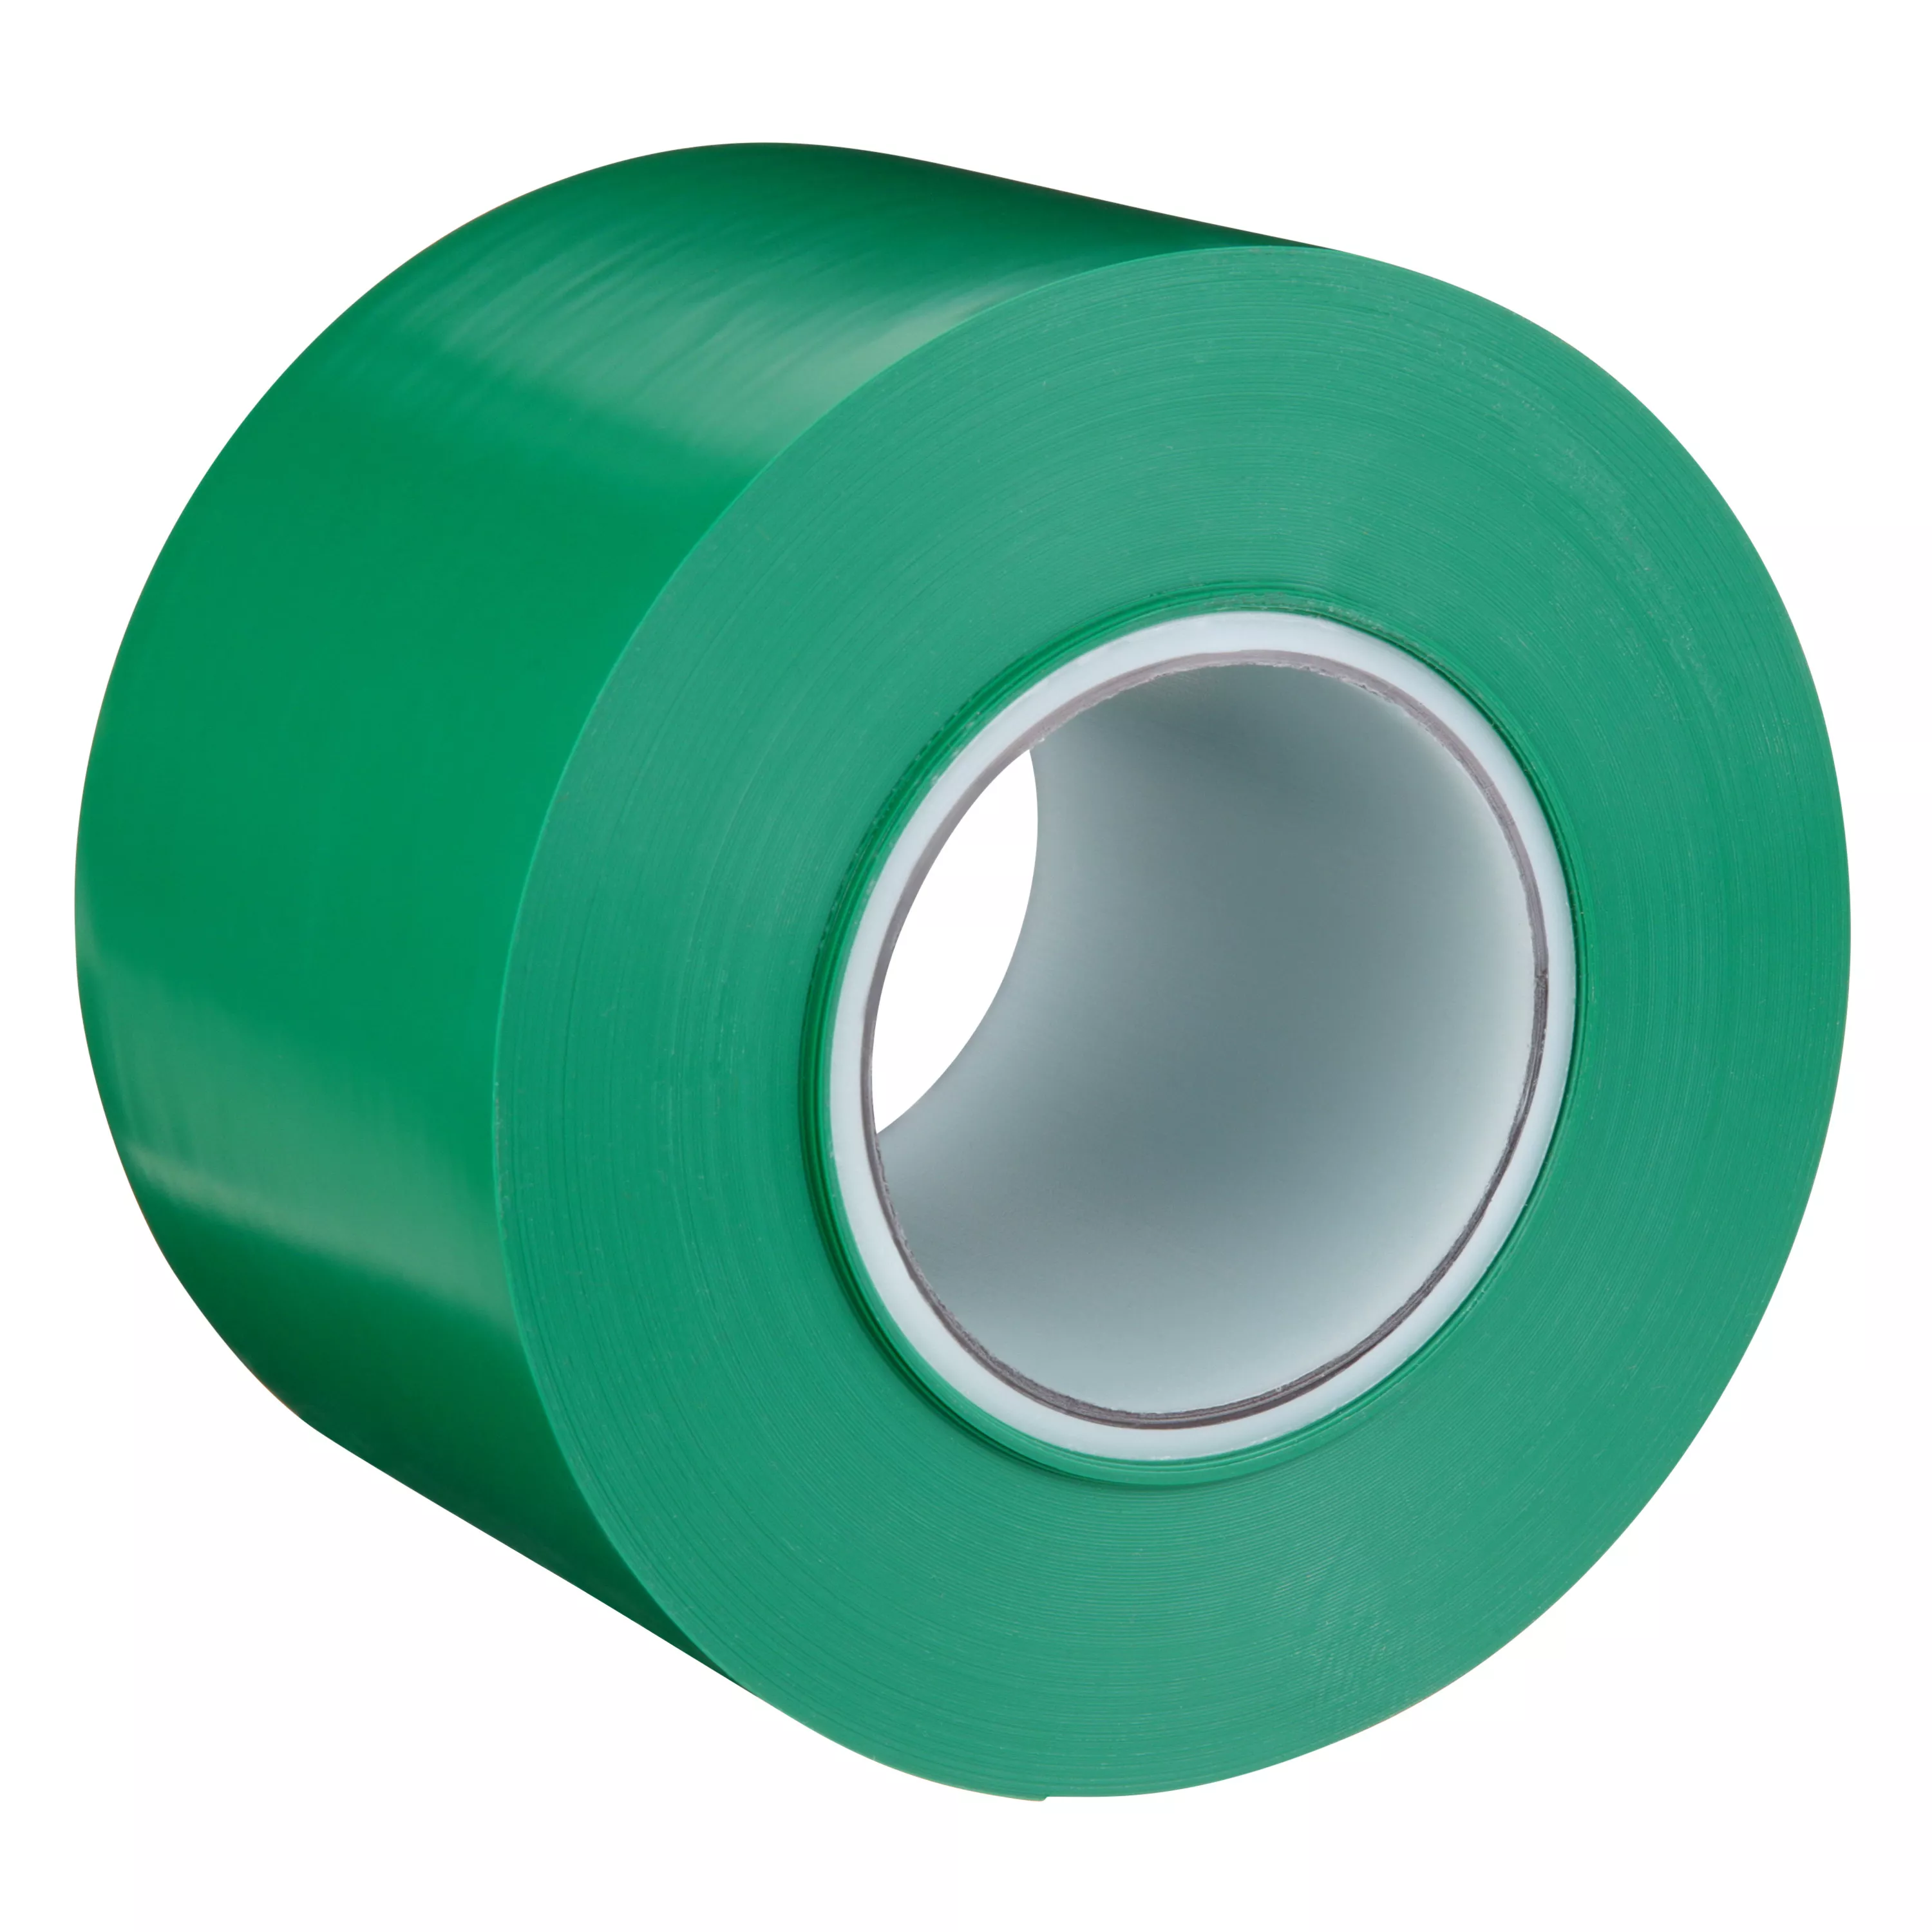 3M™ Durable Floor Marking Tape 971, Green, 4 in x 36 yd, 17 mil, 3 Rolls/Case, Individually Wrapped Conveniently Packaged